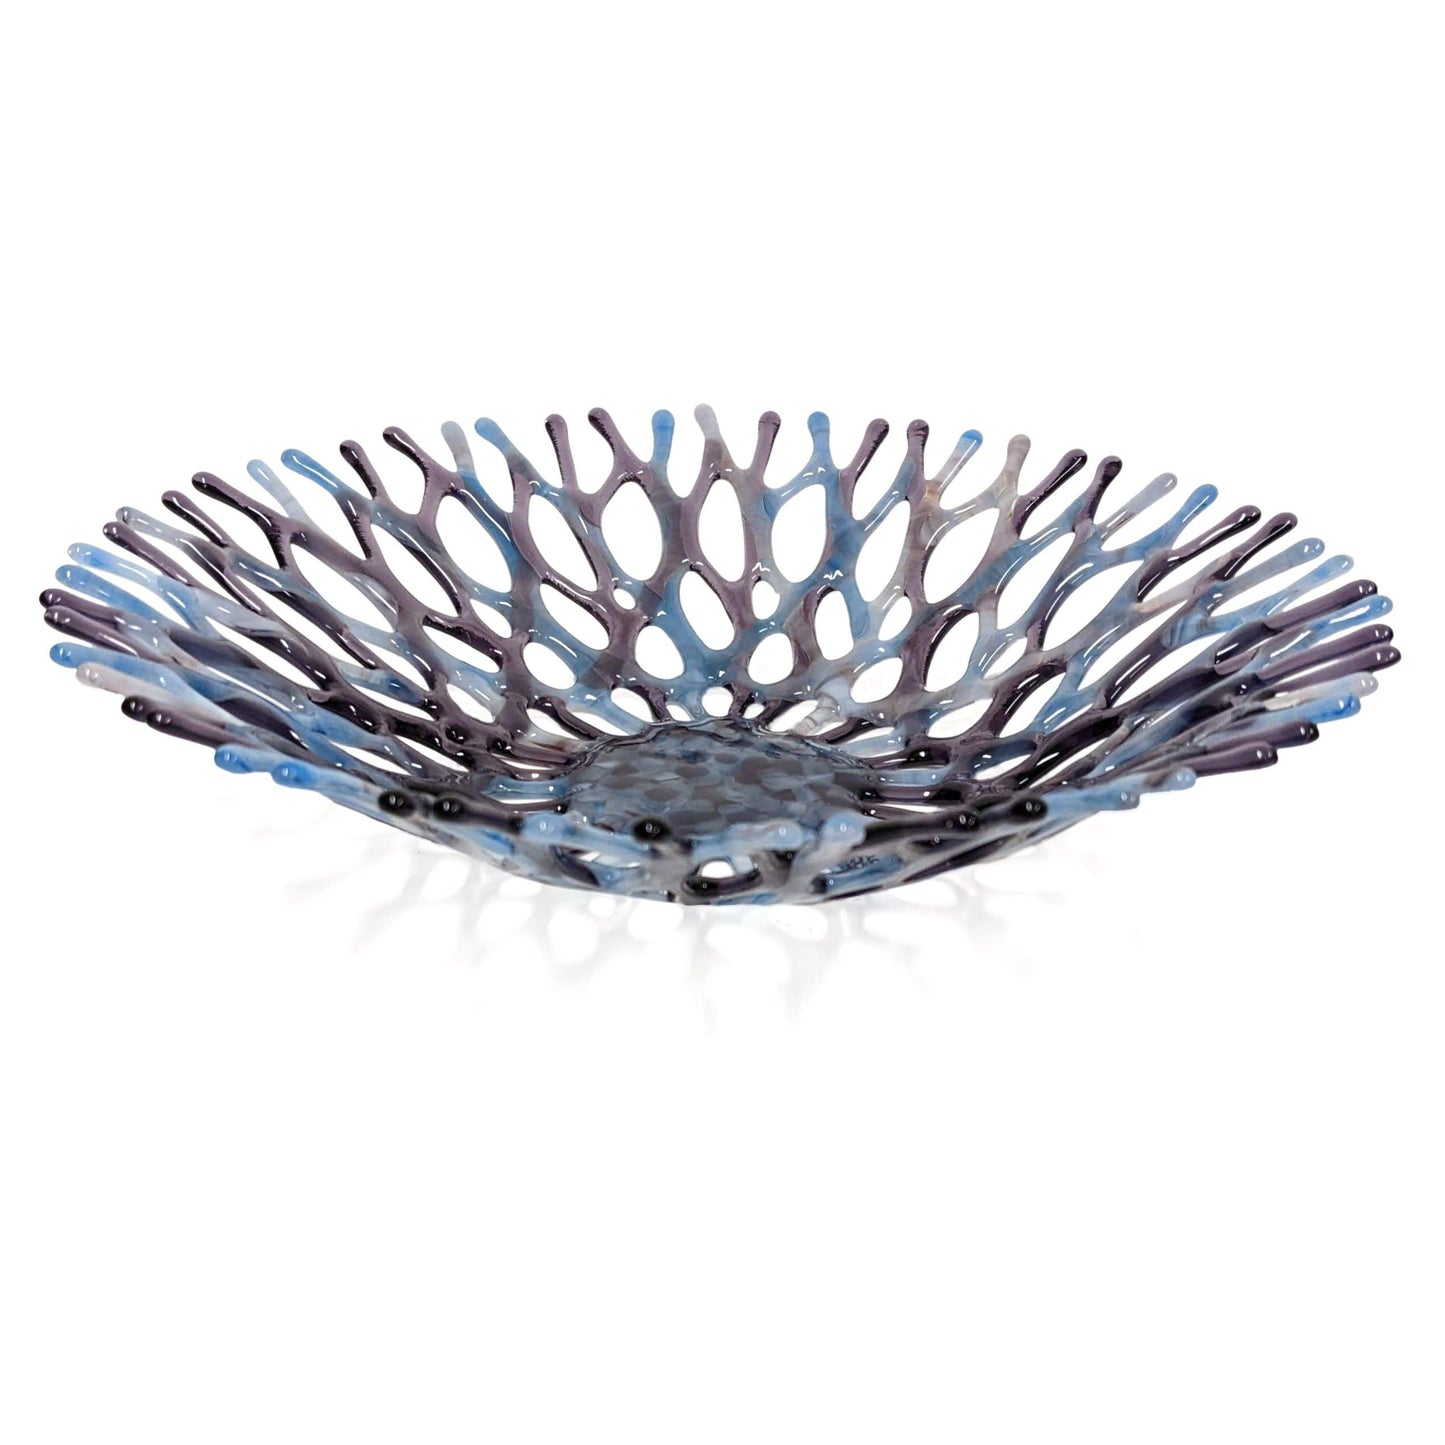 Glass Art Coral Bowl in Dusk Blue and Purple